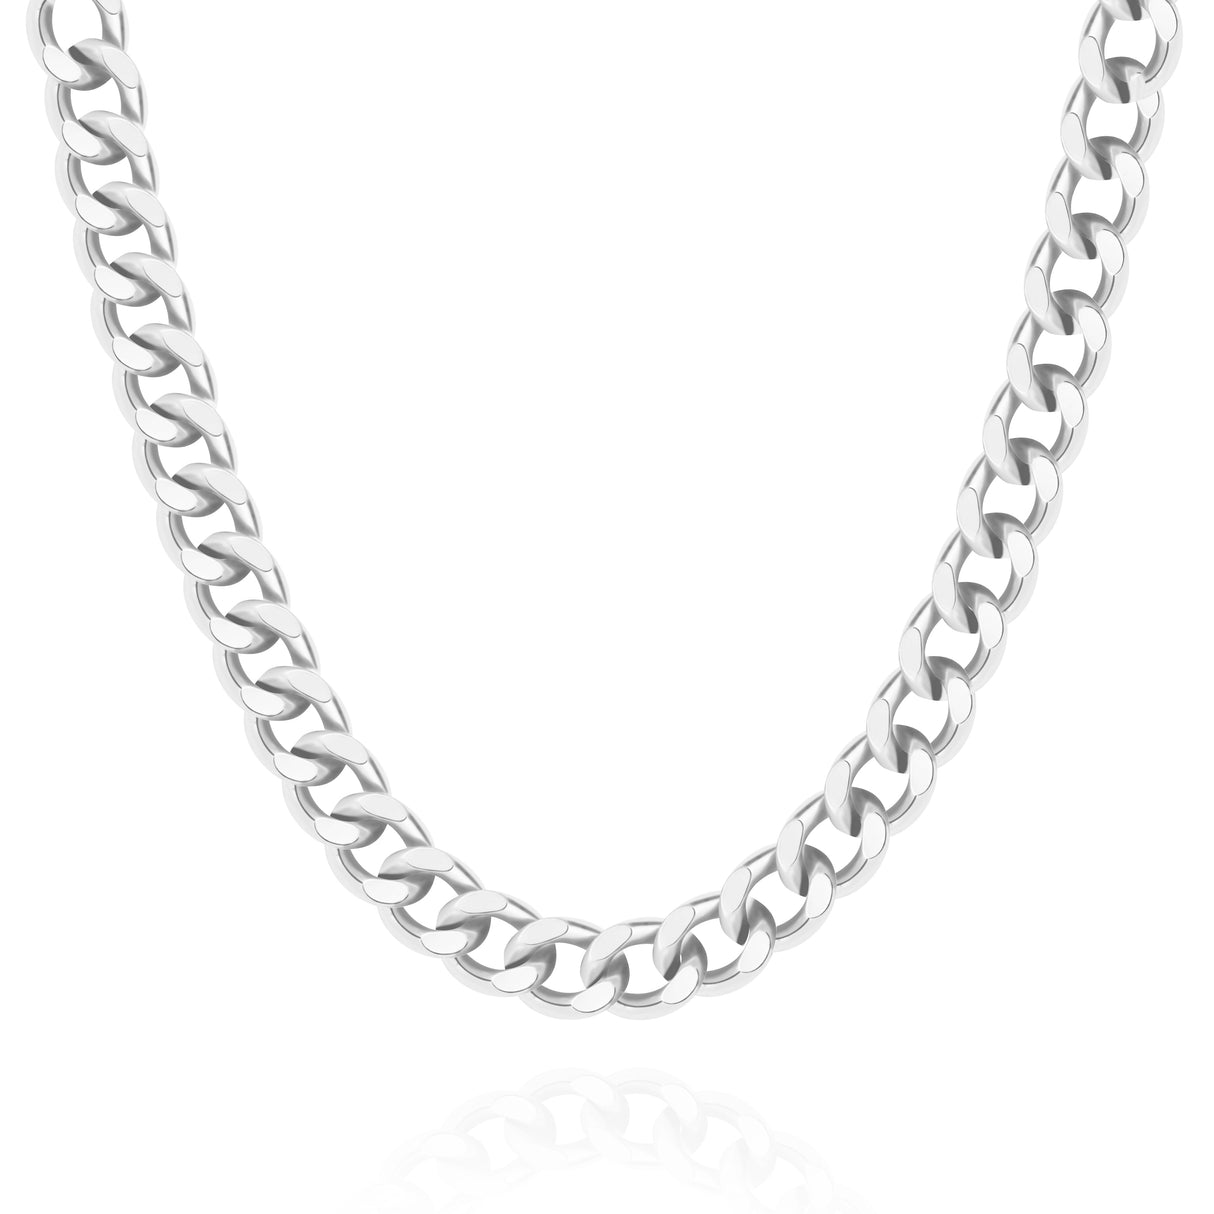 Cuban Link Chain Necklace for Men Women 14K Gold Silver Plated - GexWorldwide